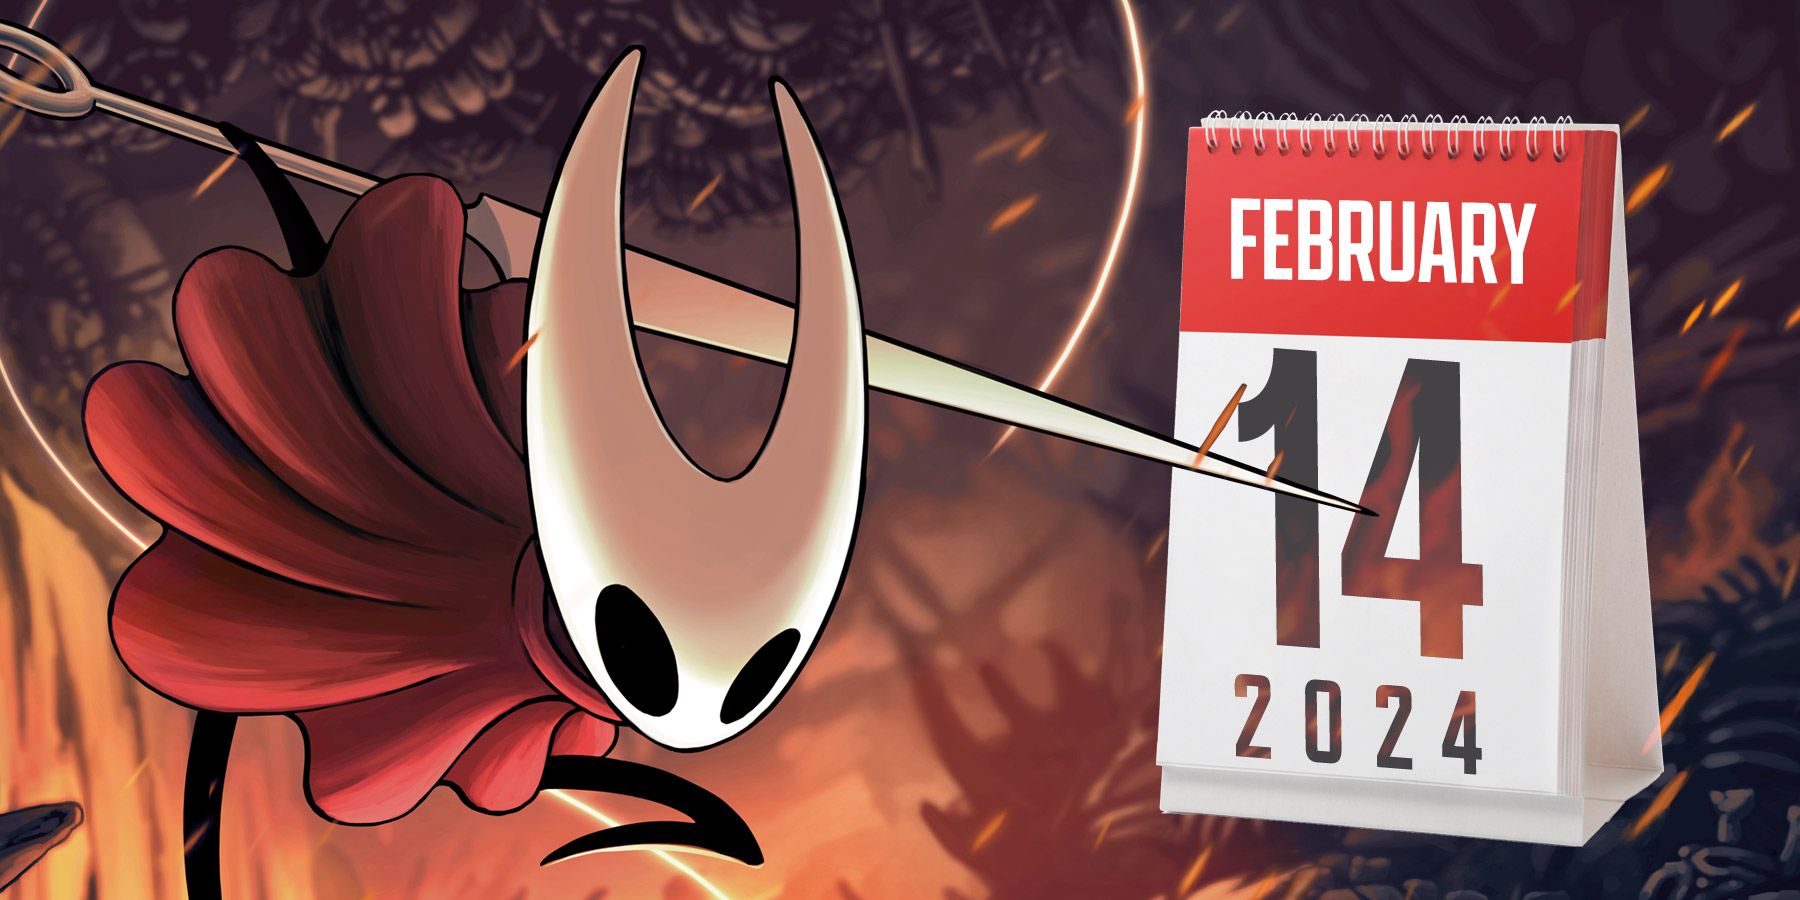 Hollow Knight: Silksong PS4 & PS5 Version Confirmed by Team Cherry